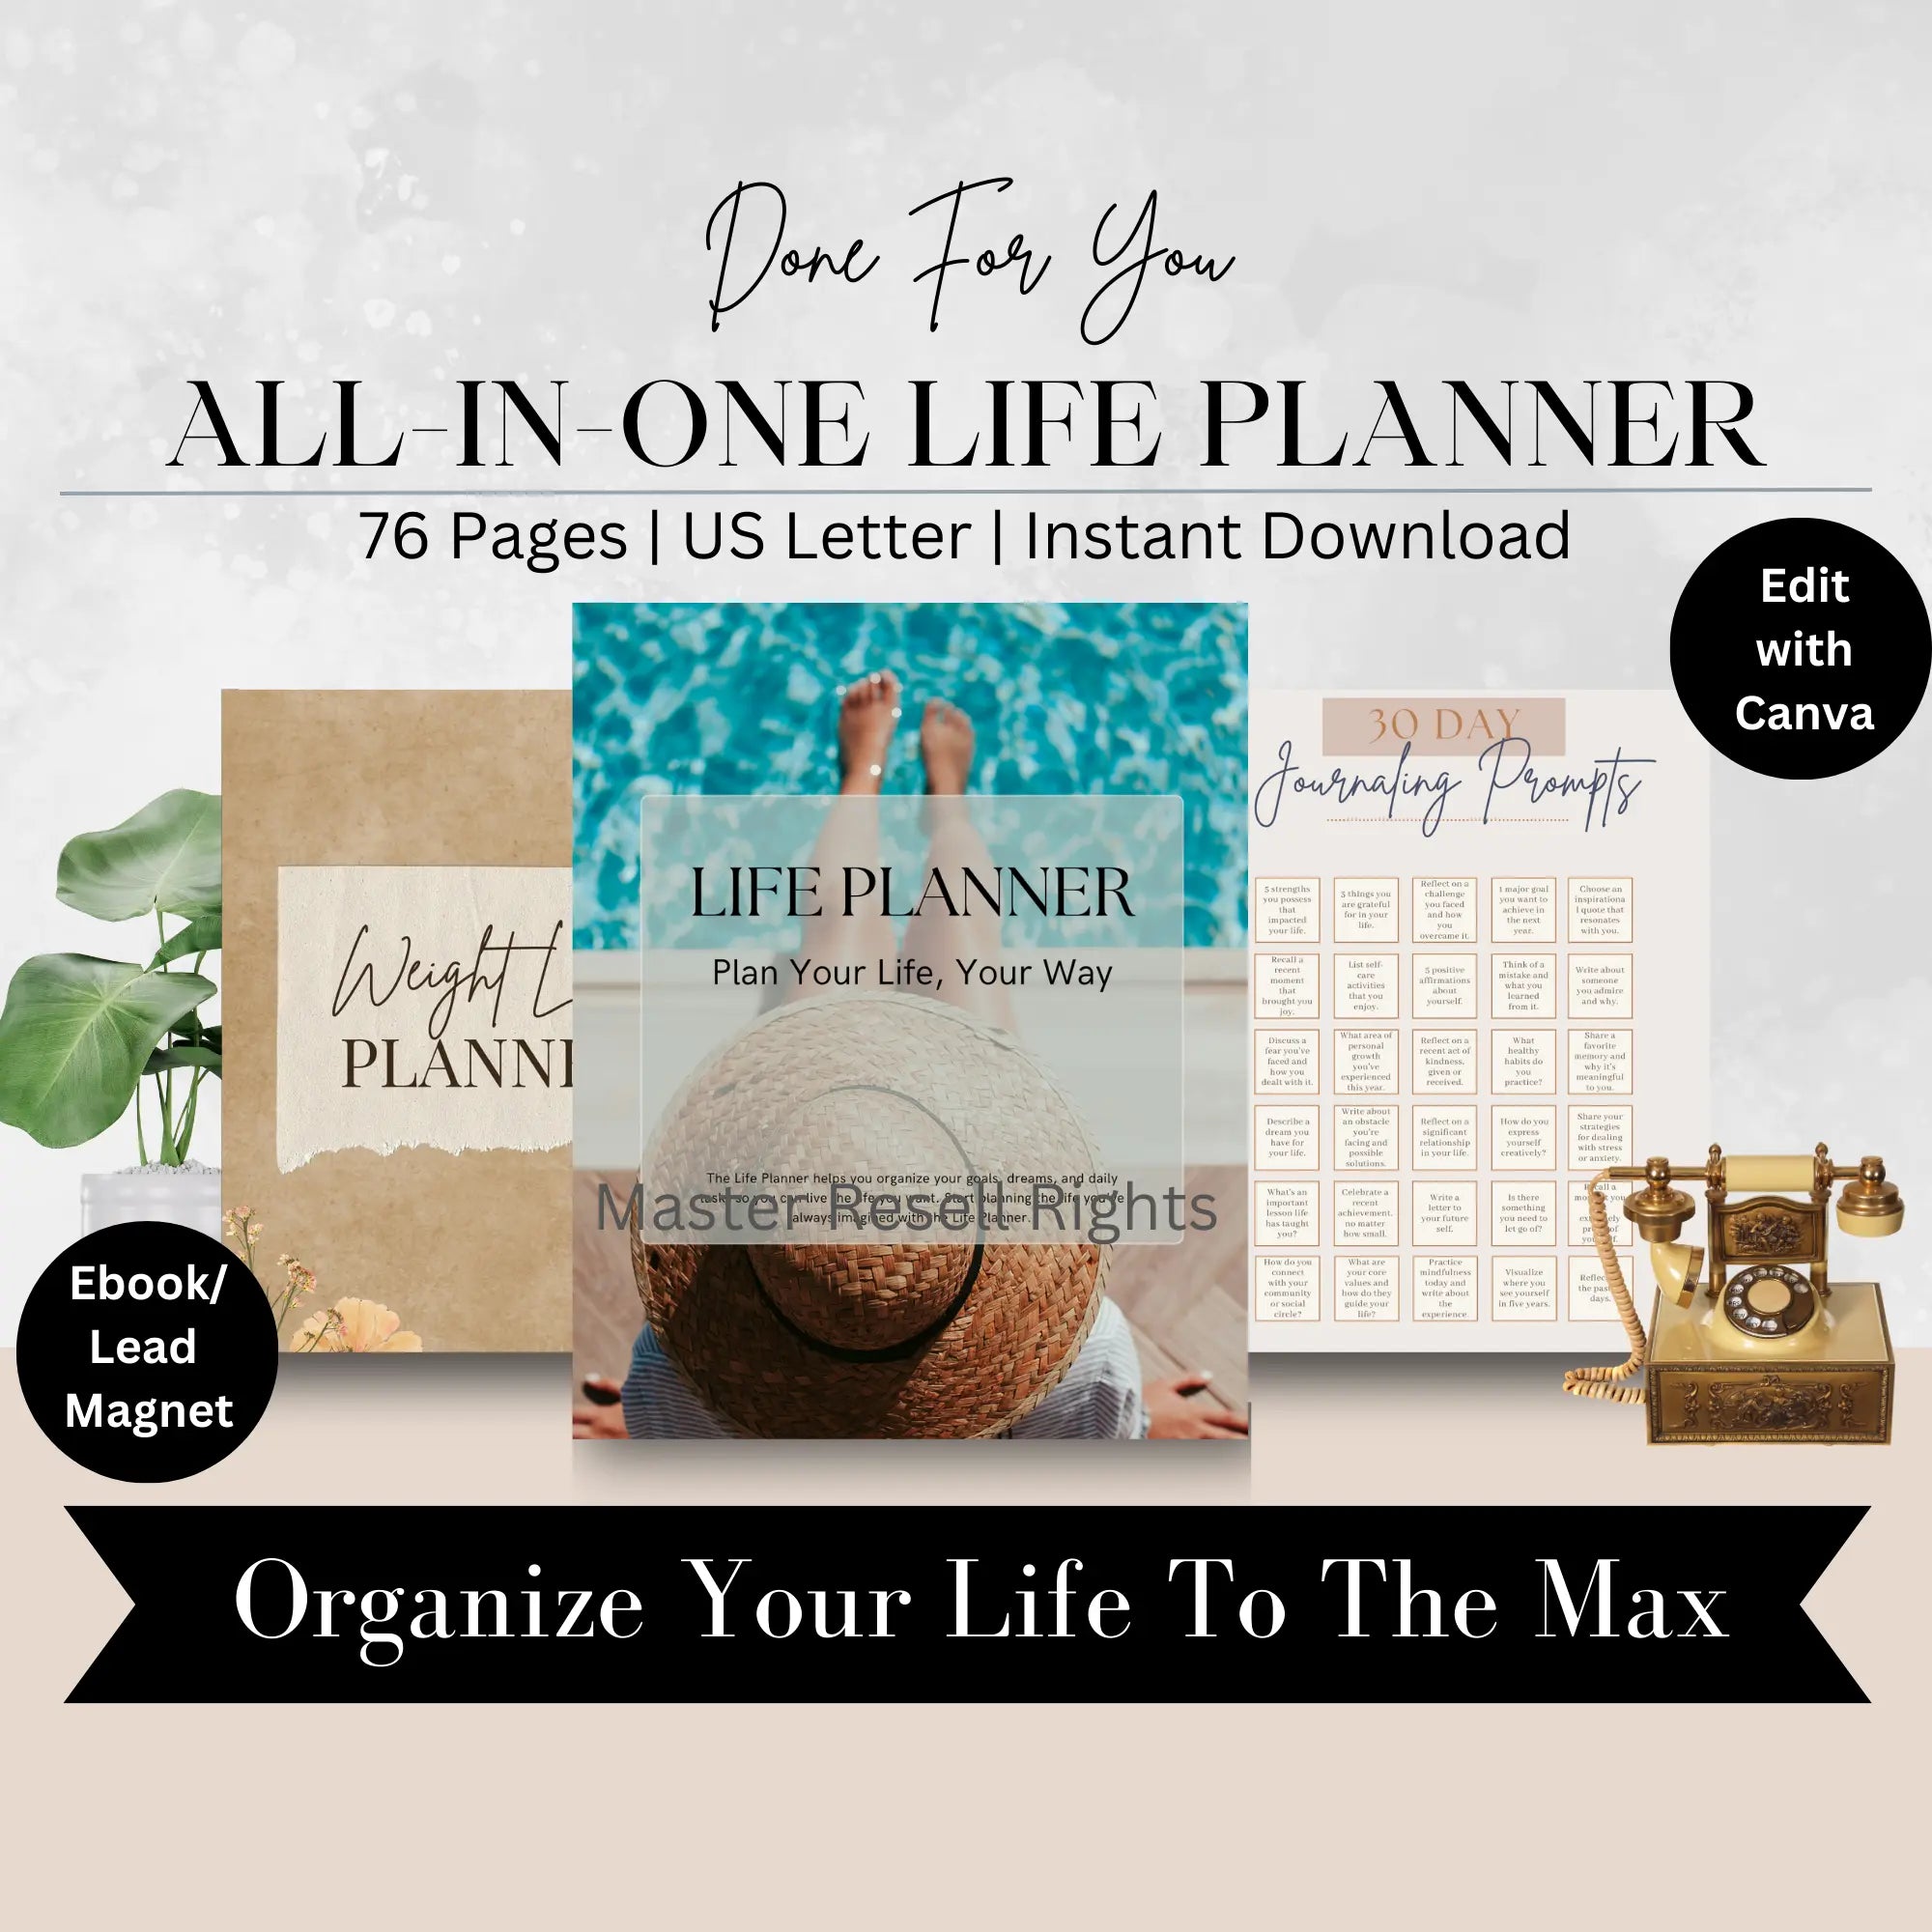 All-In-One Life Planner